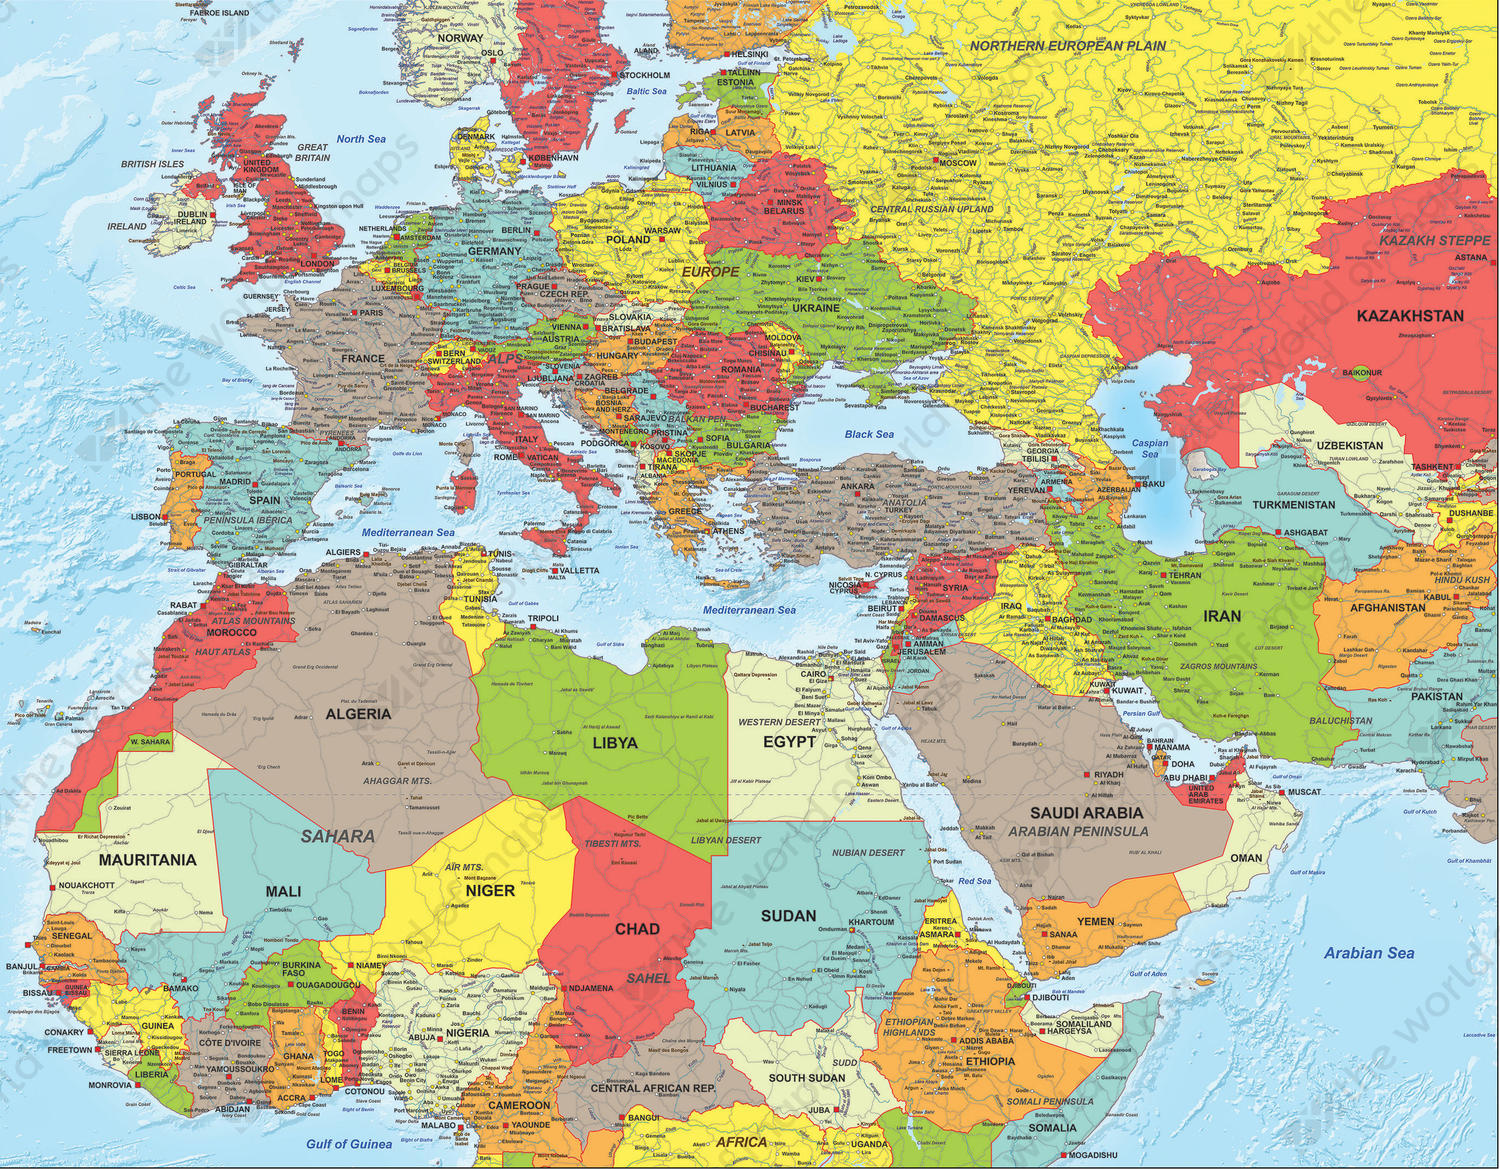 europe and middle east map Digital Political Map North Africa Middle East And Europe 1317 The World Of Maps Com europe and middle east map